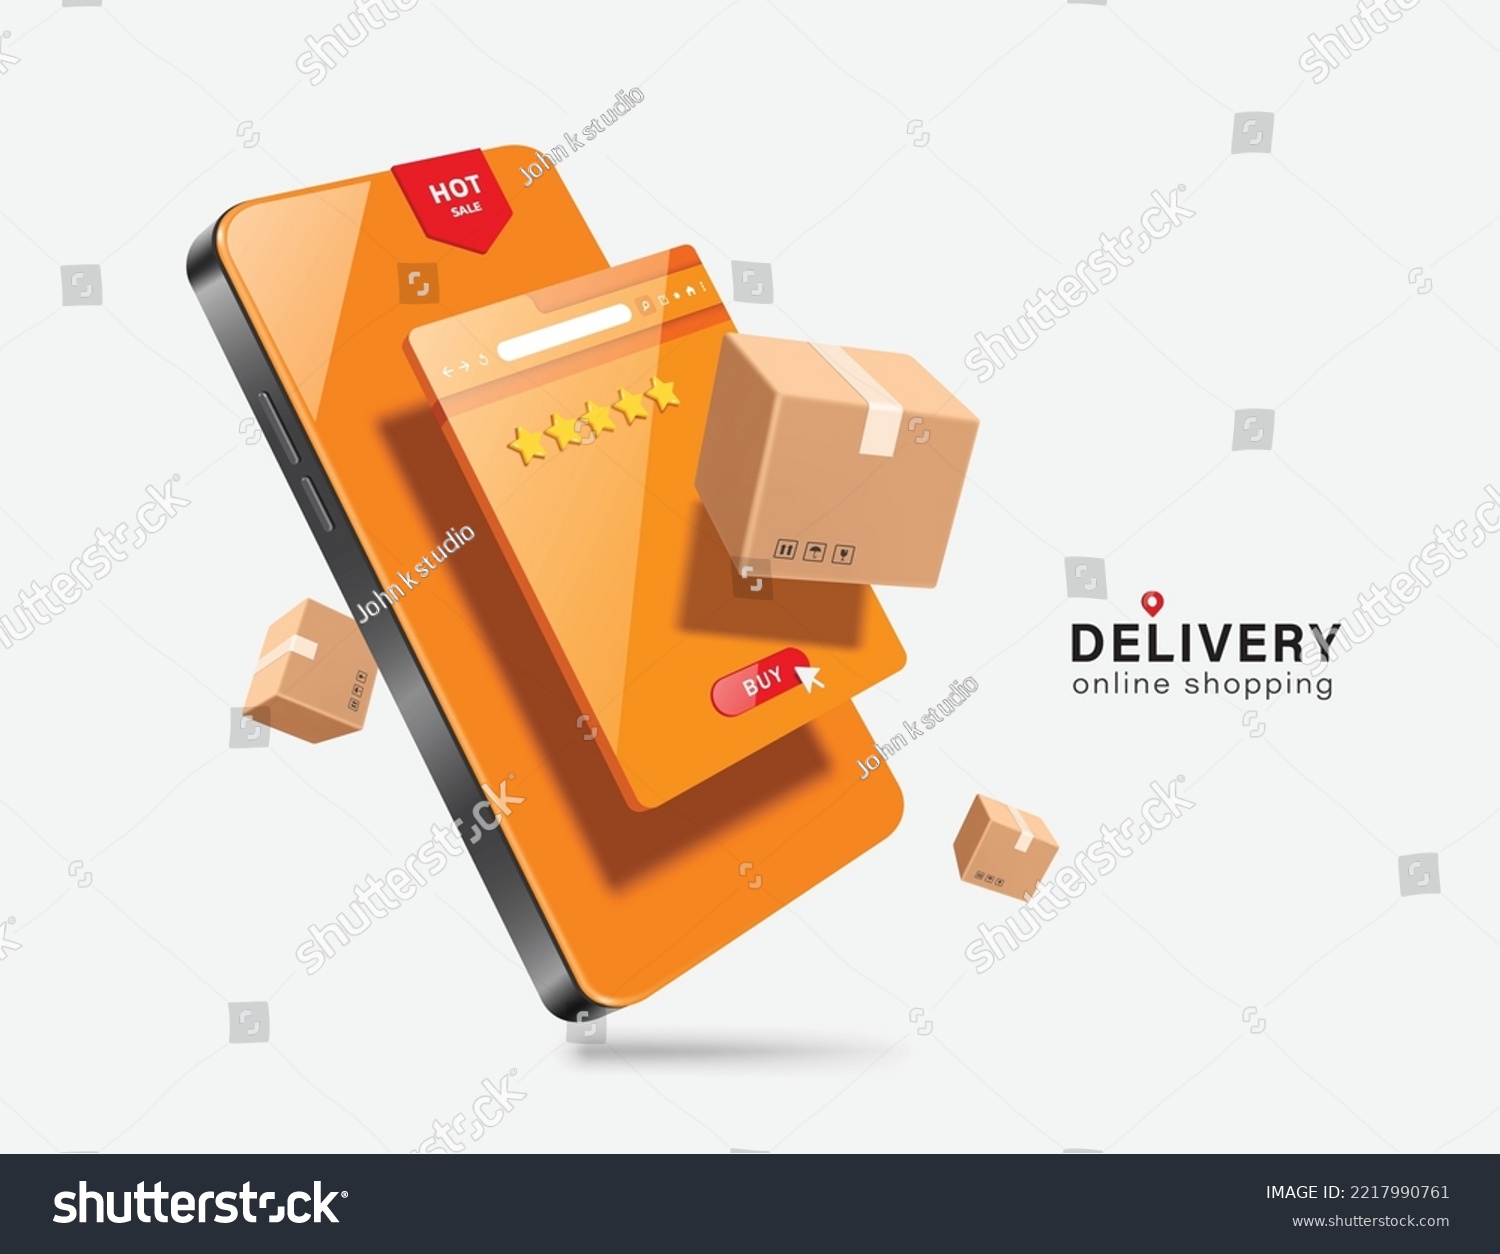 SVG of Brown parcel box or cardboard box display and floats out of web browser that is an online shopping platform on smartphone,vector 3d isolated for transport,logistics and online shopping concept design svg